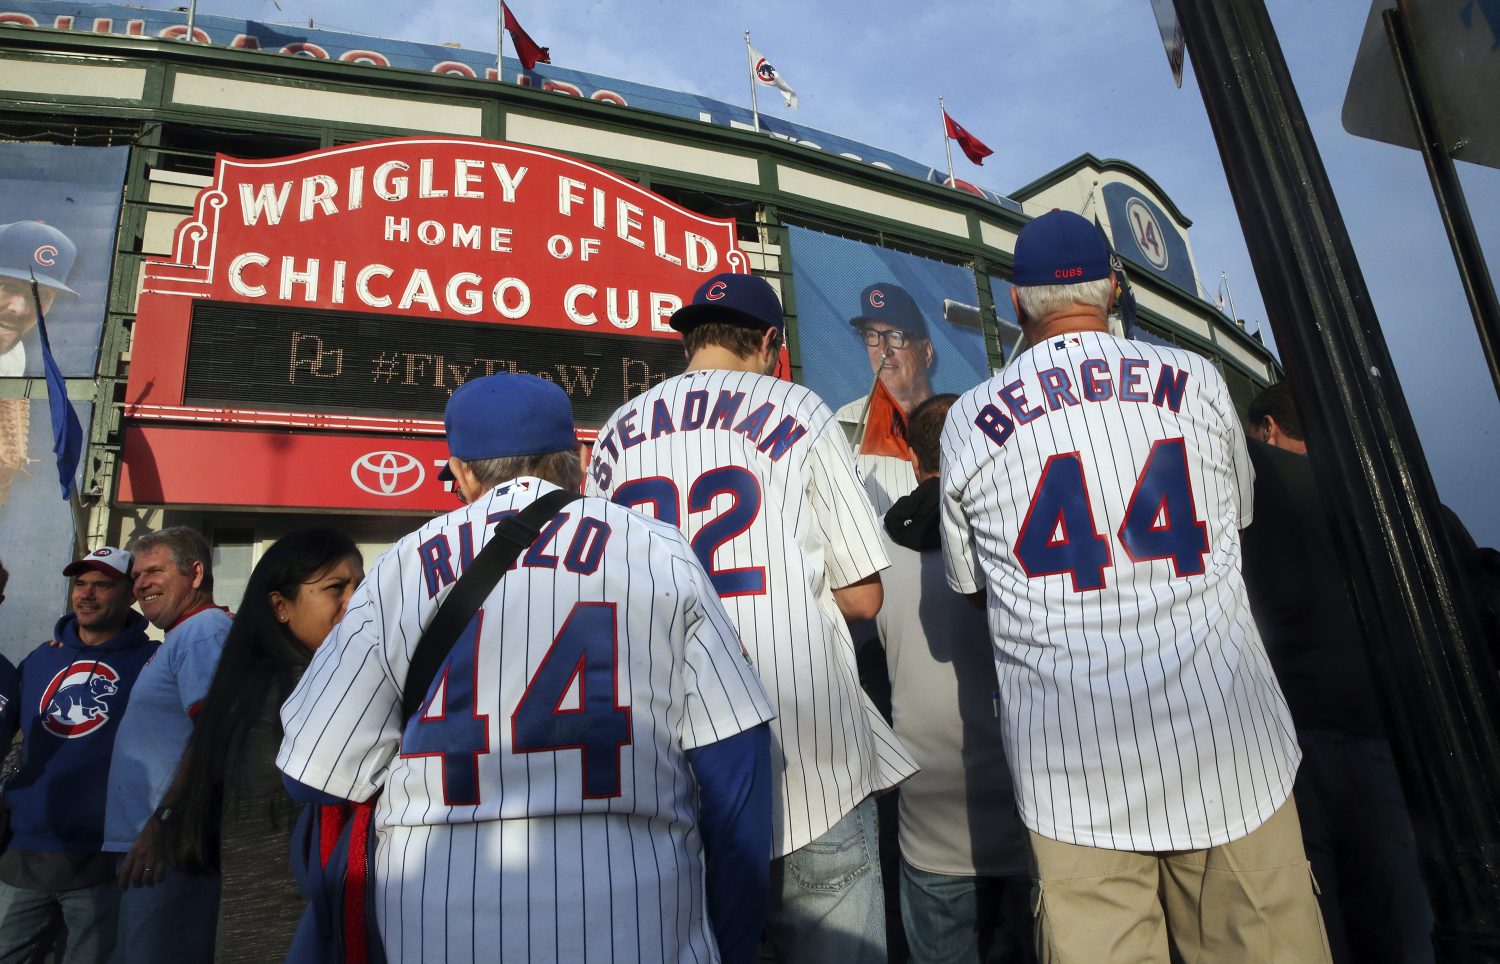 Fans arrive for Game 4 of the NLCS as the Chicago Cubs play host to the New York Mets on Wednesday, Oct. 21, 2015, at Wrigley Field in Chicago. (Nuccio DiNuzzo/Chicago Tribune/TNS)